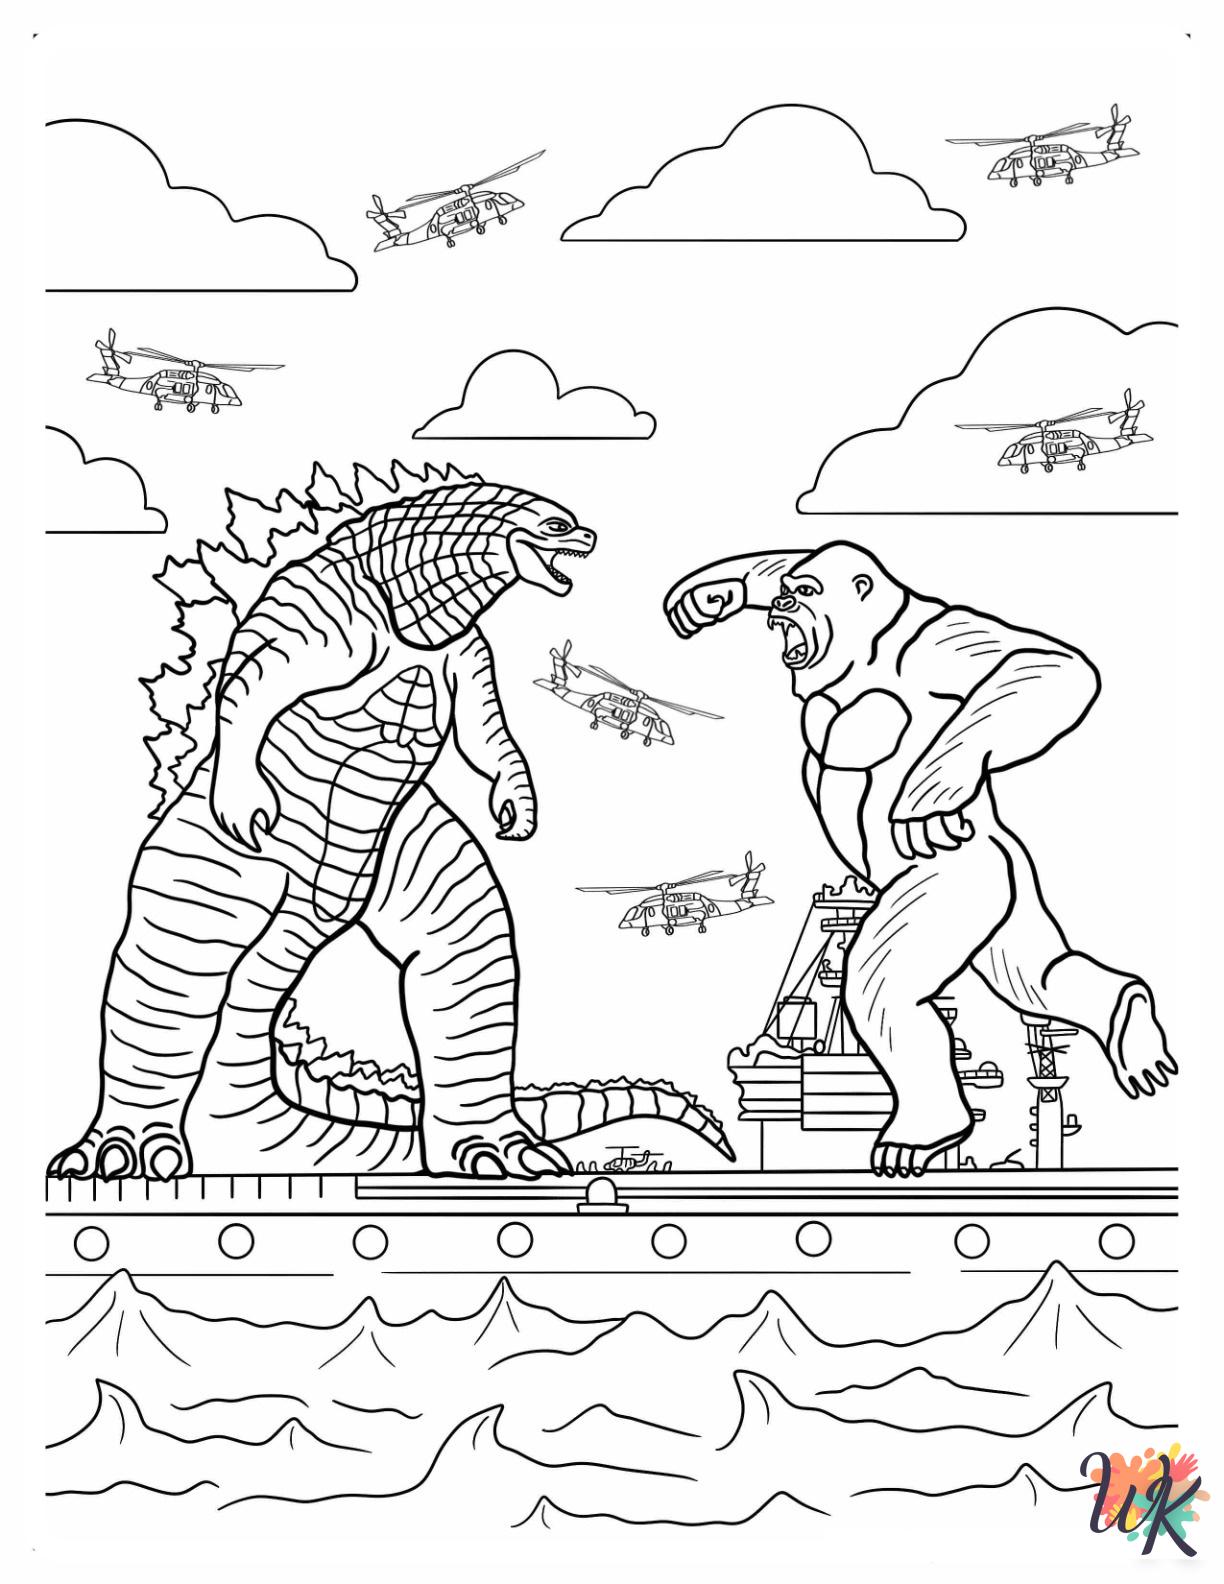 Godzilla coloring pages for preschoolers